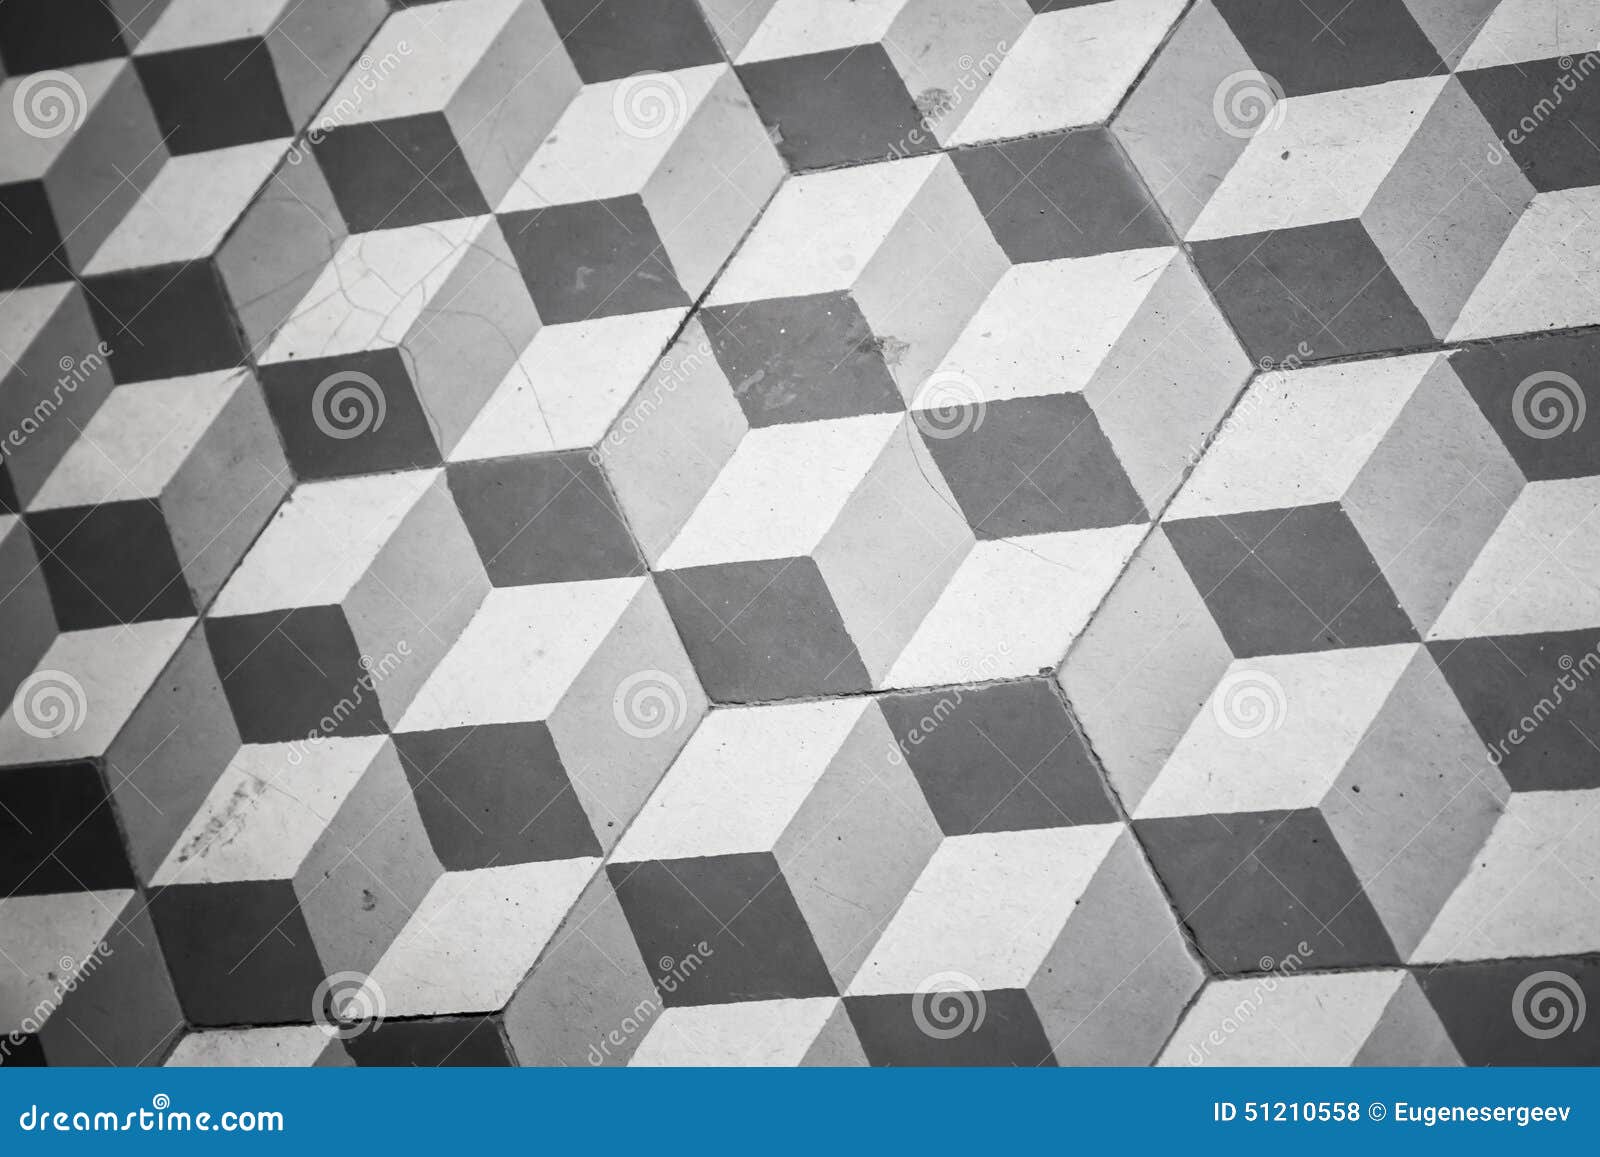 Old Ceramic Tile With Black-and-white Pattern Stock Photo - Image ... - Old black and white tiling on floor, cubic pattern Royalty Free Stock Photos